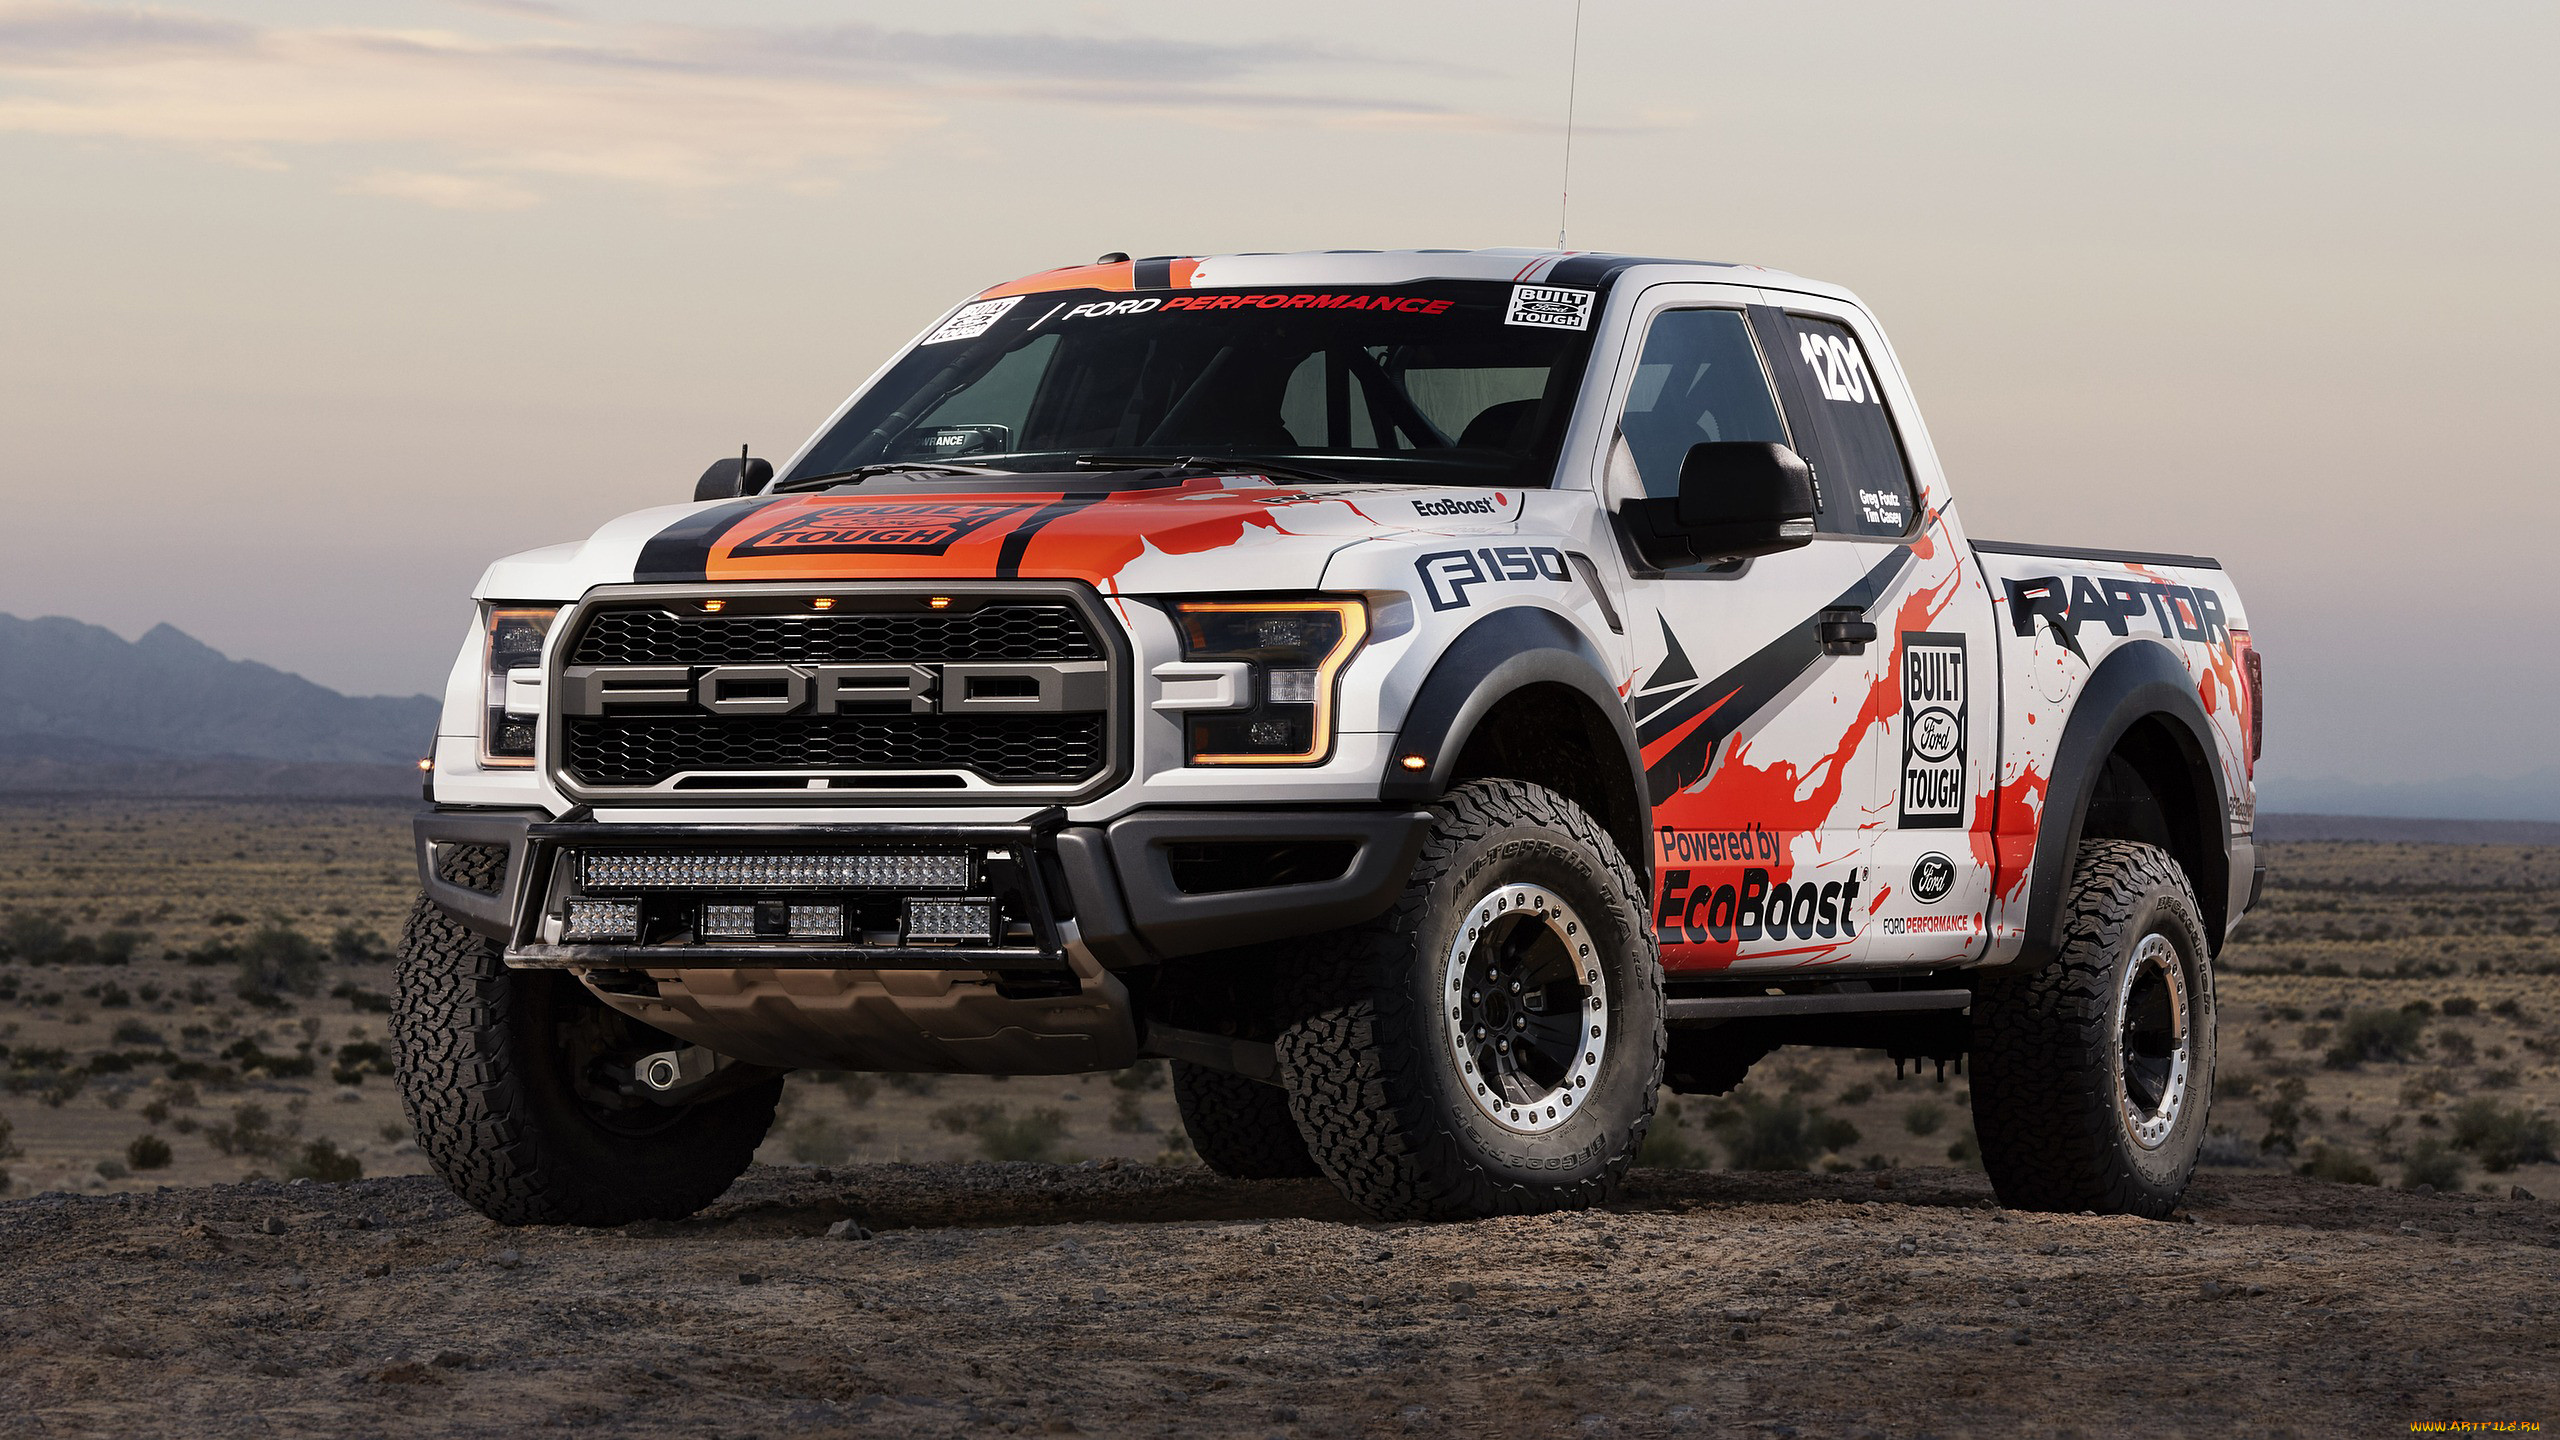 ford f-150 raptor race truck concept 2016, , ford, f-150, truck, concept, race, raptor, 2016